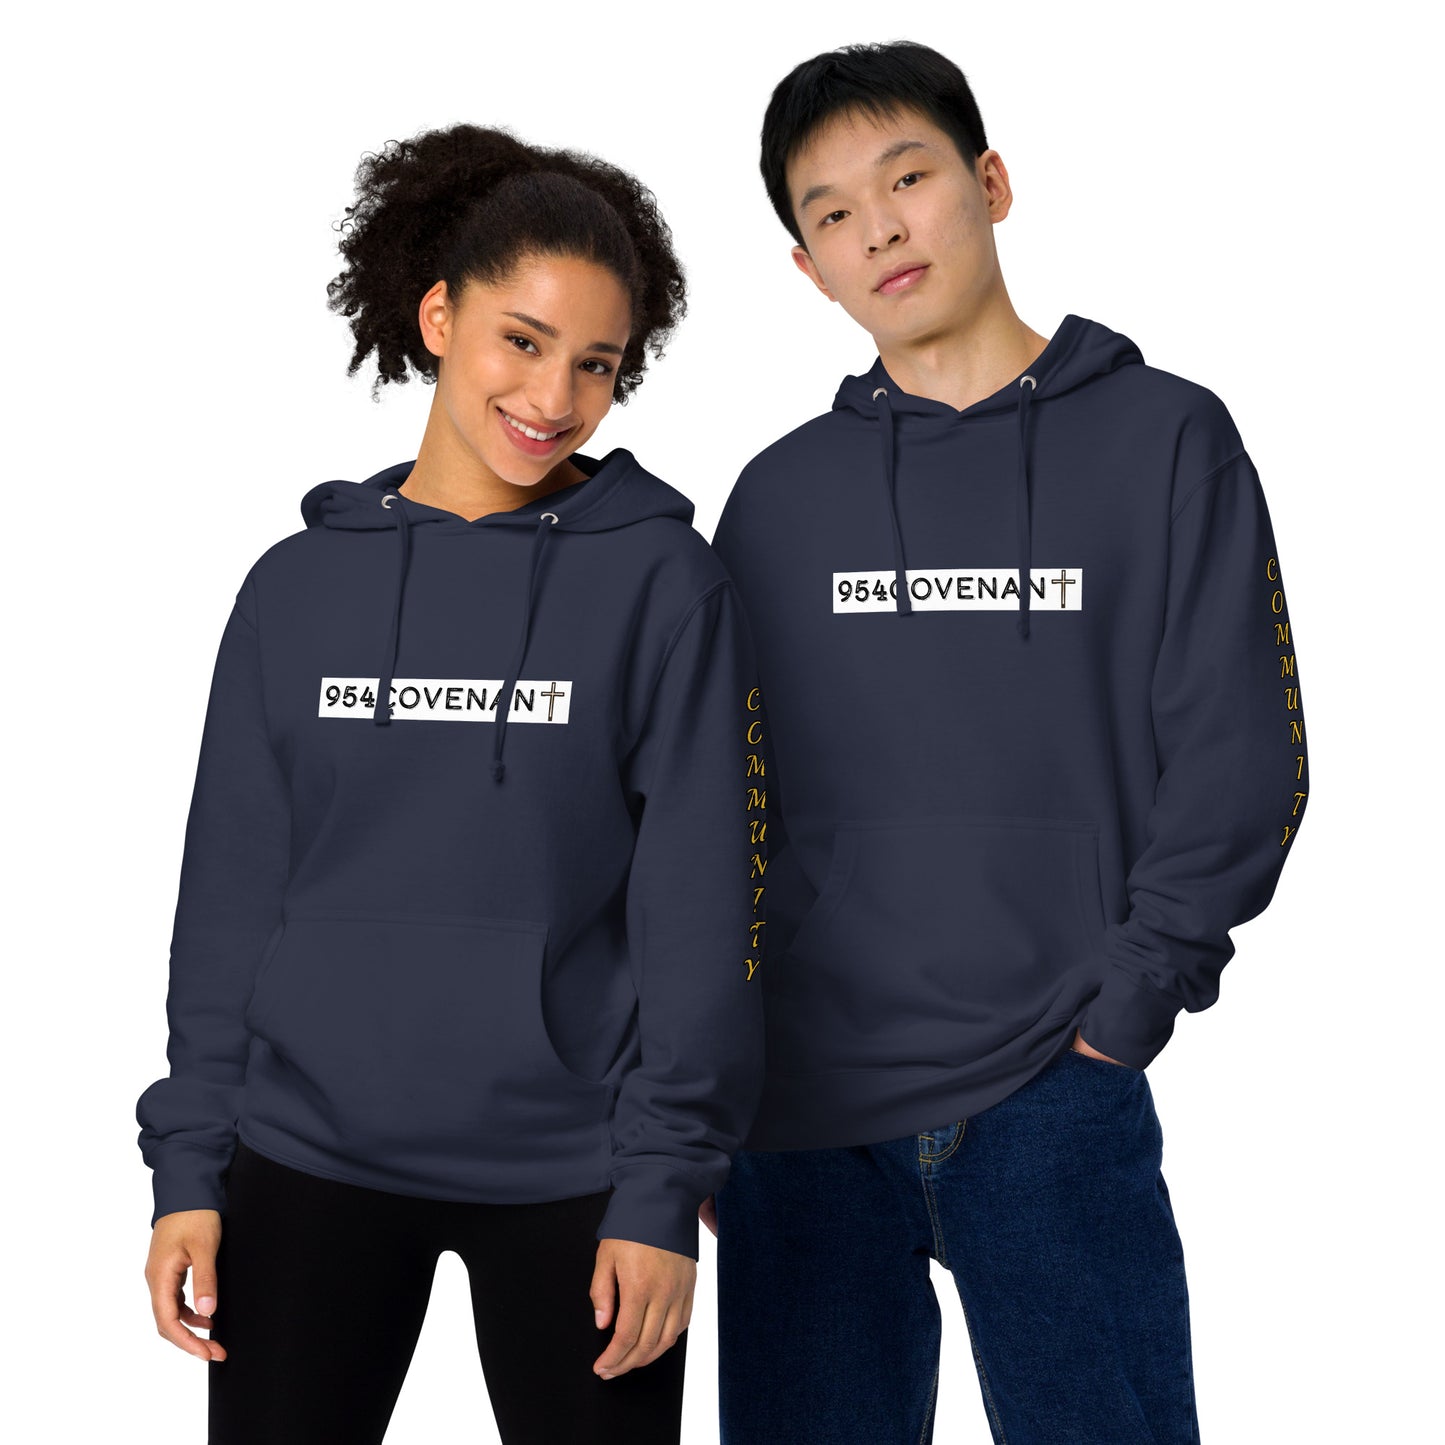 954covenant Unisex midweight hoodie